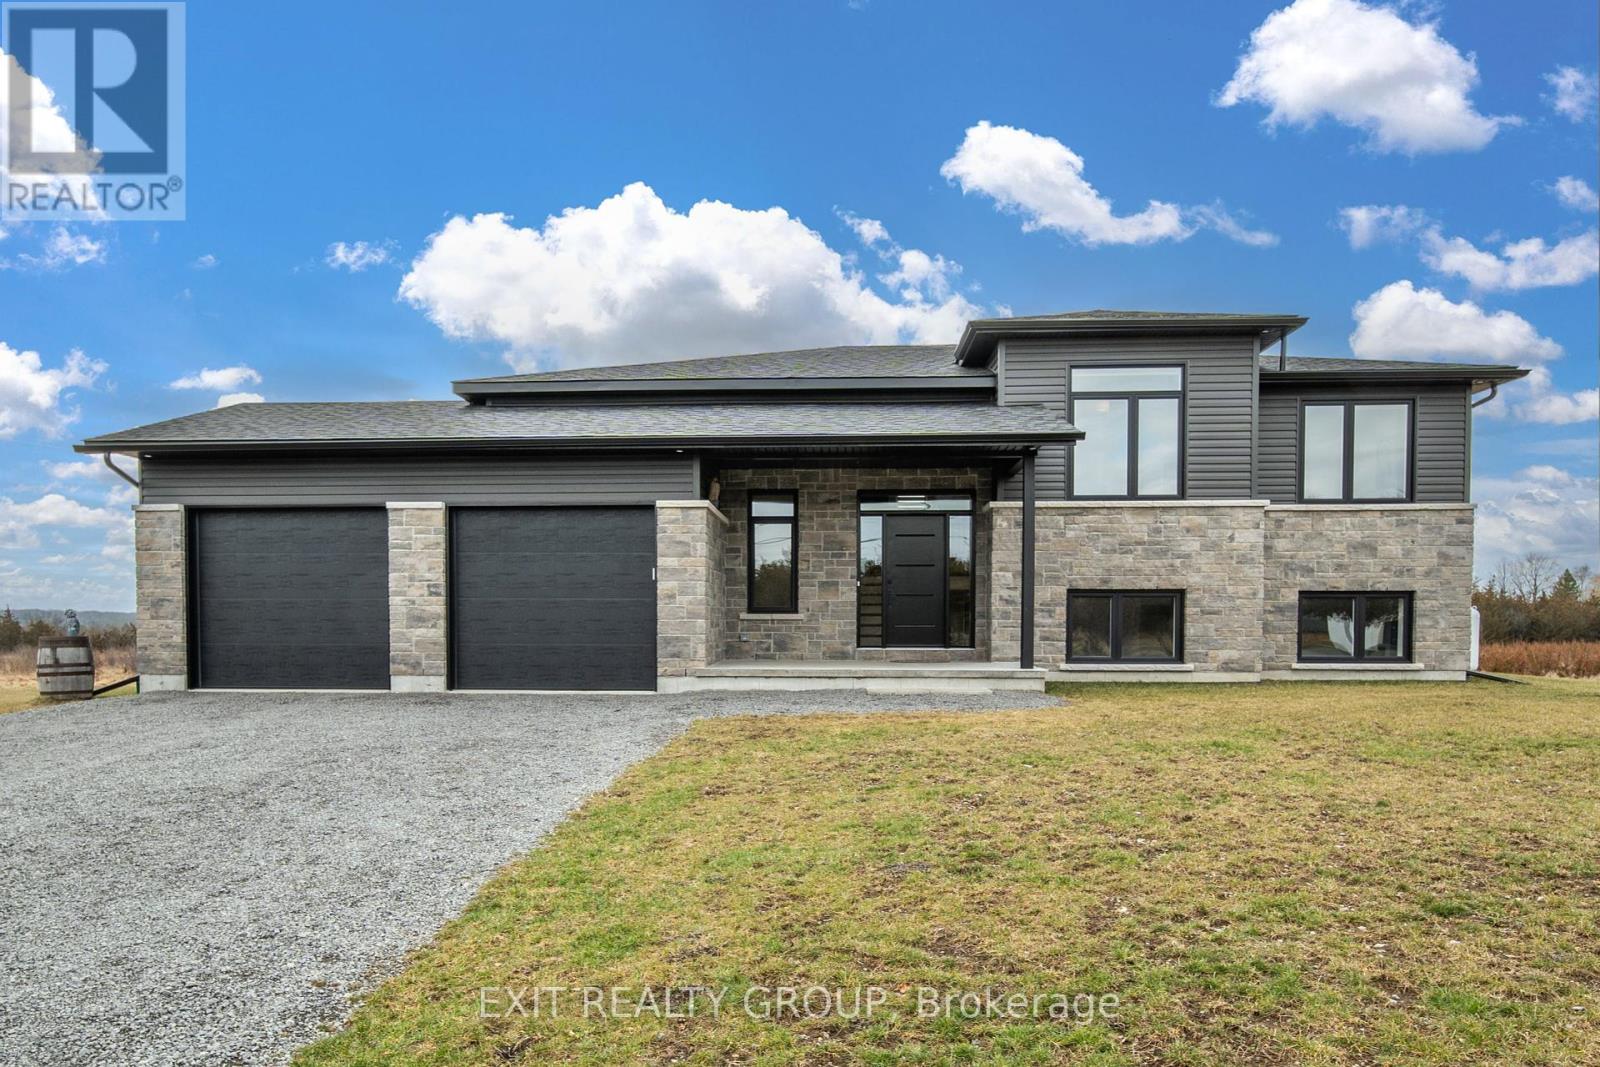 35 COUNTY RD 29 located in Prince Edward County, Ontario